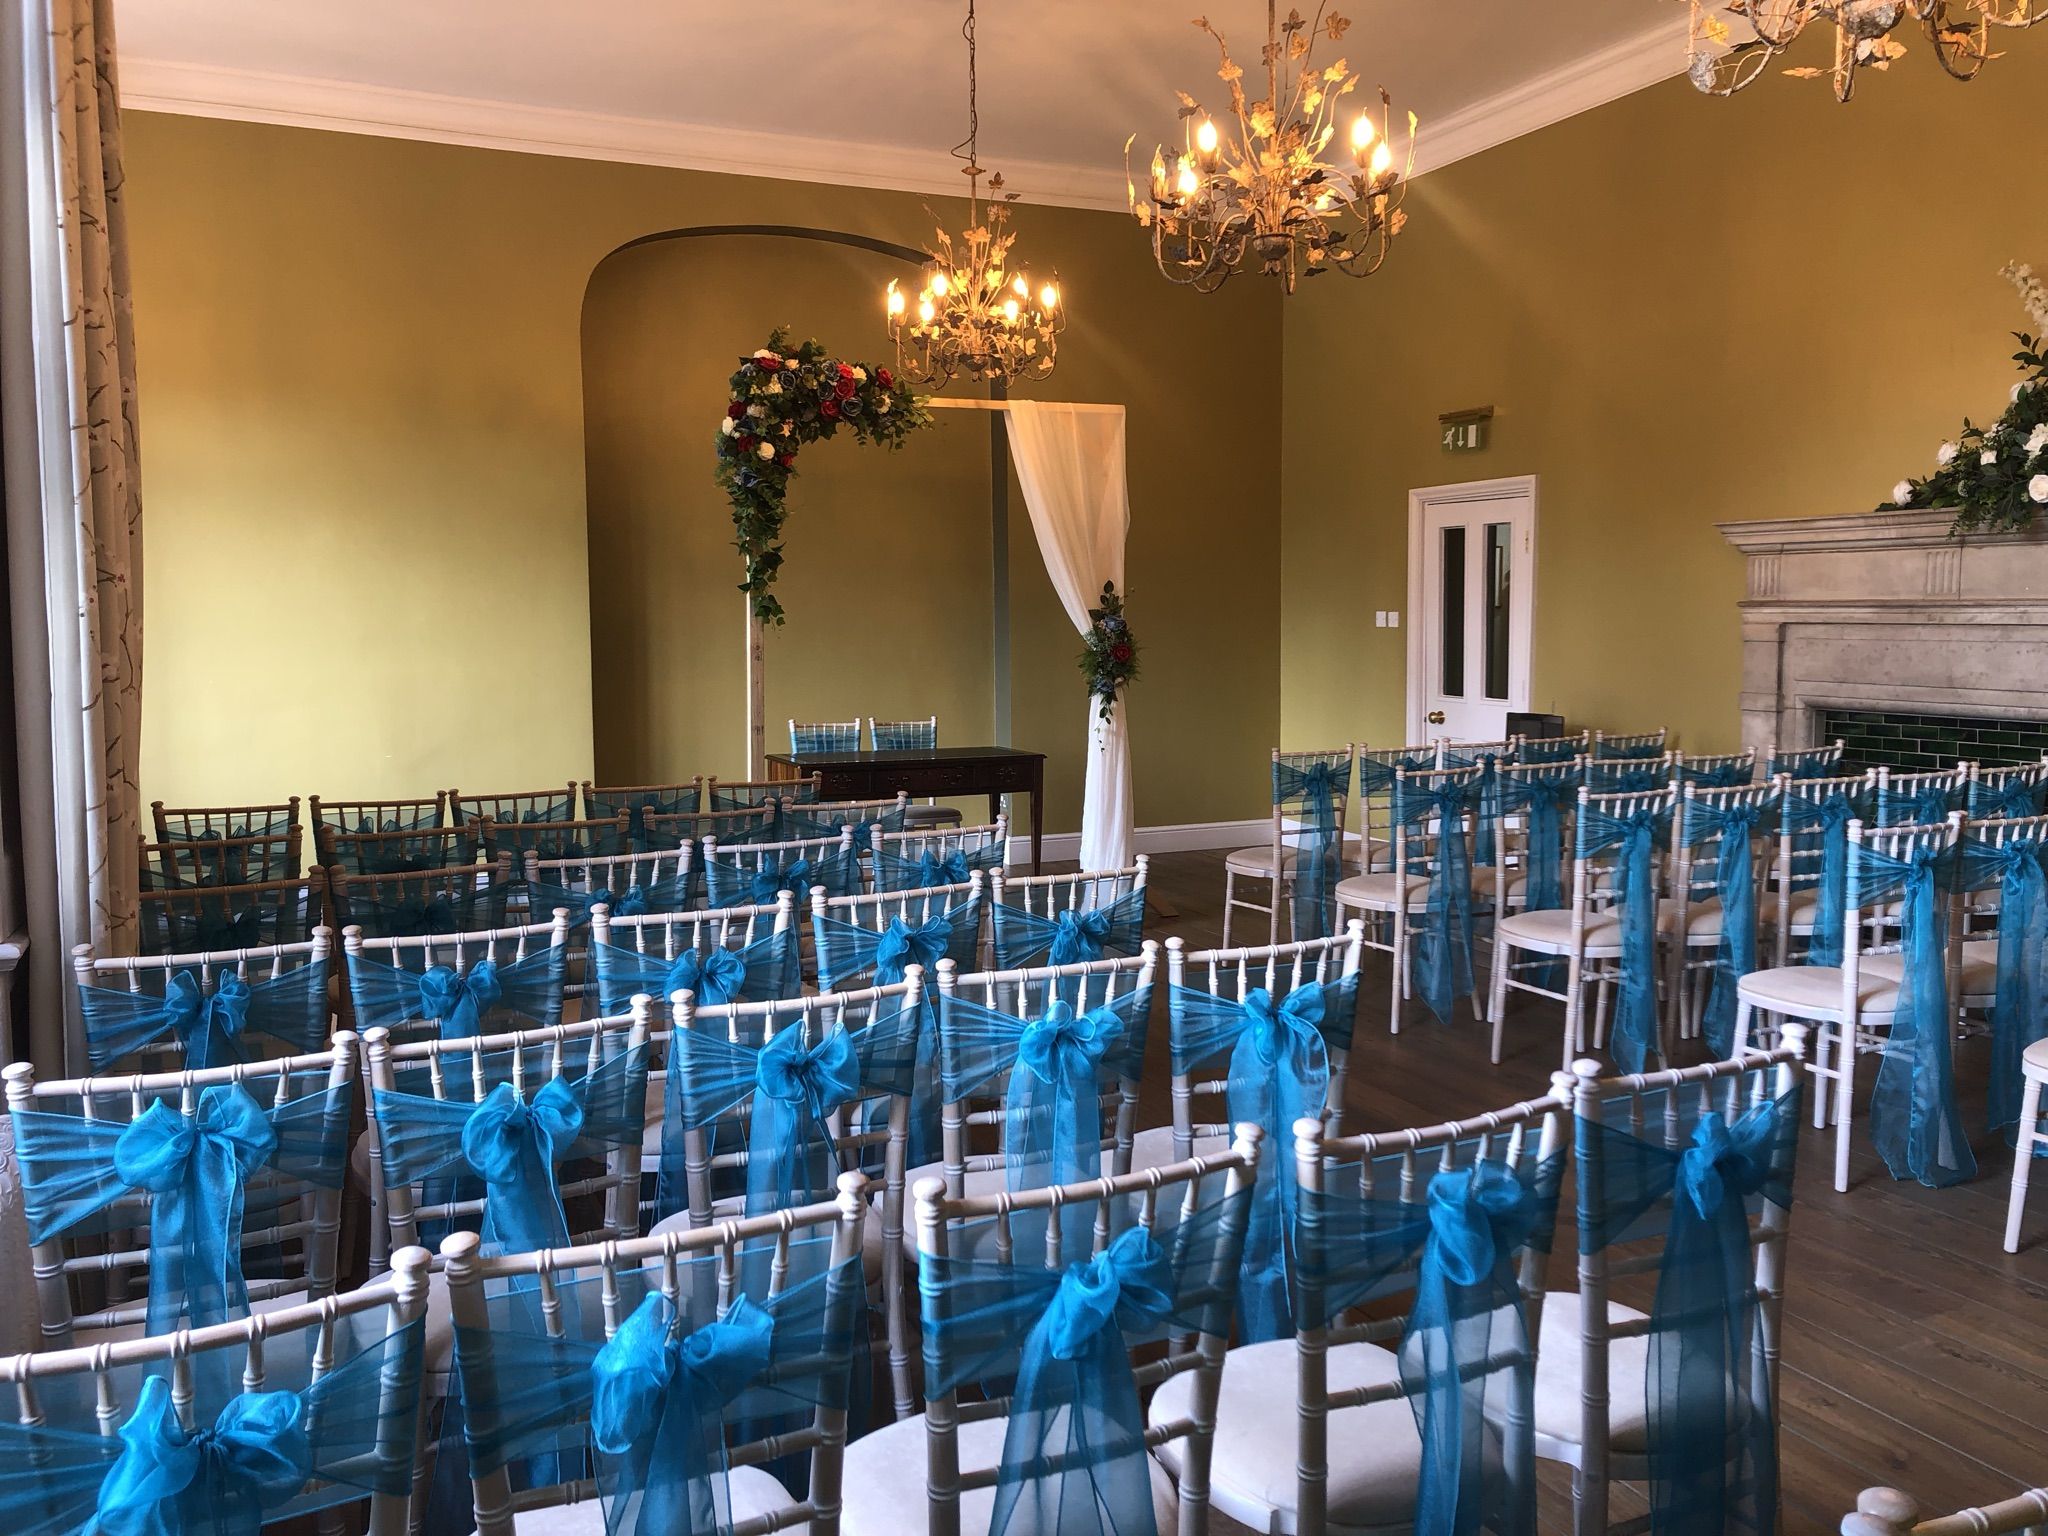 a room filled with lots of white chairs covered in blue bows.